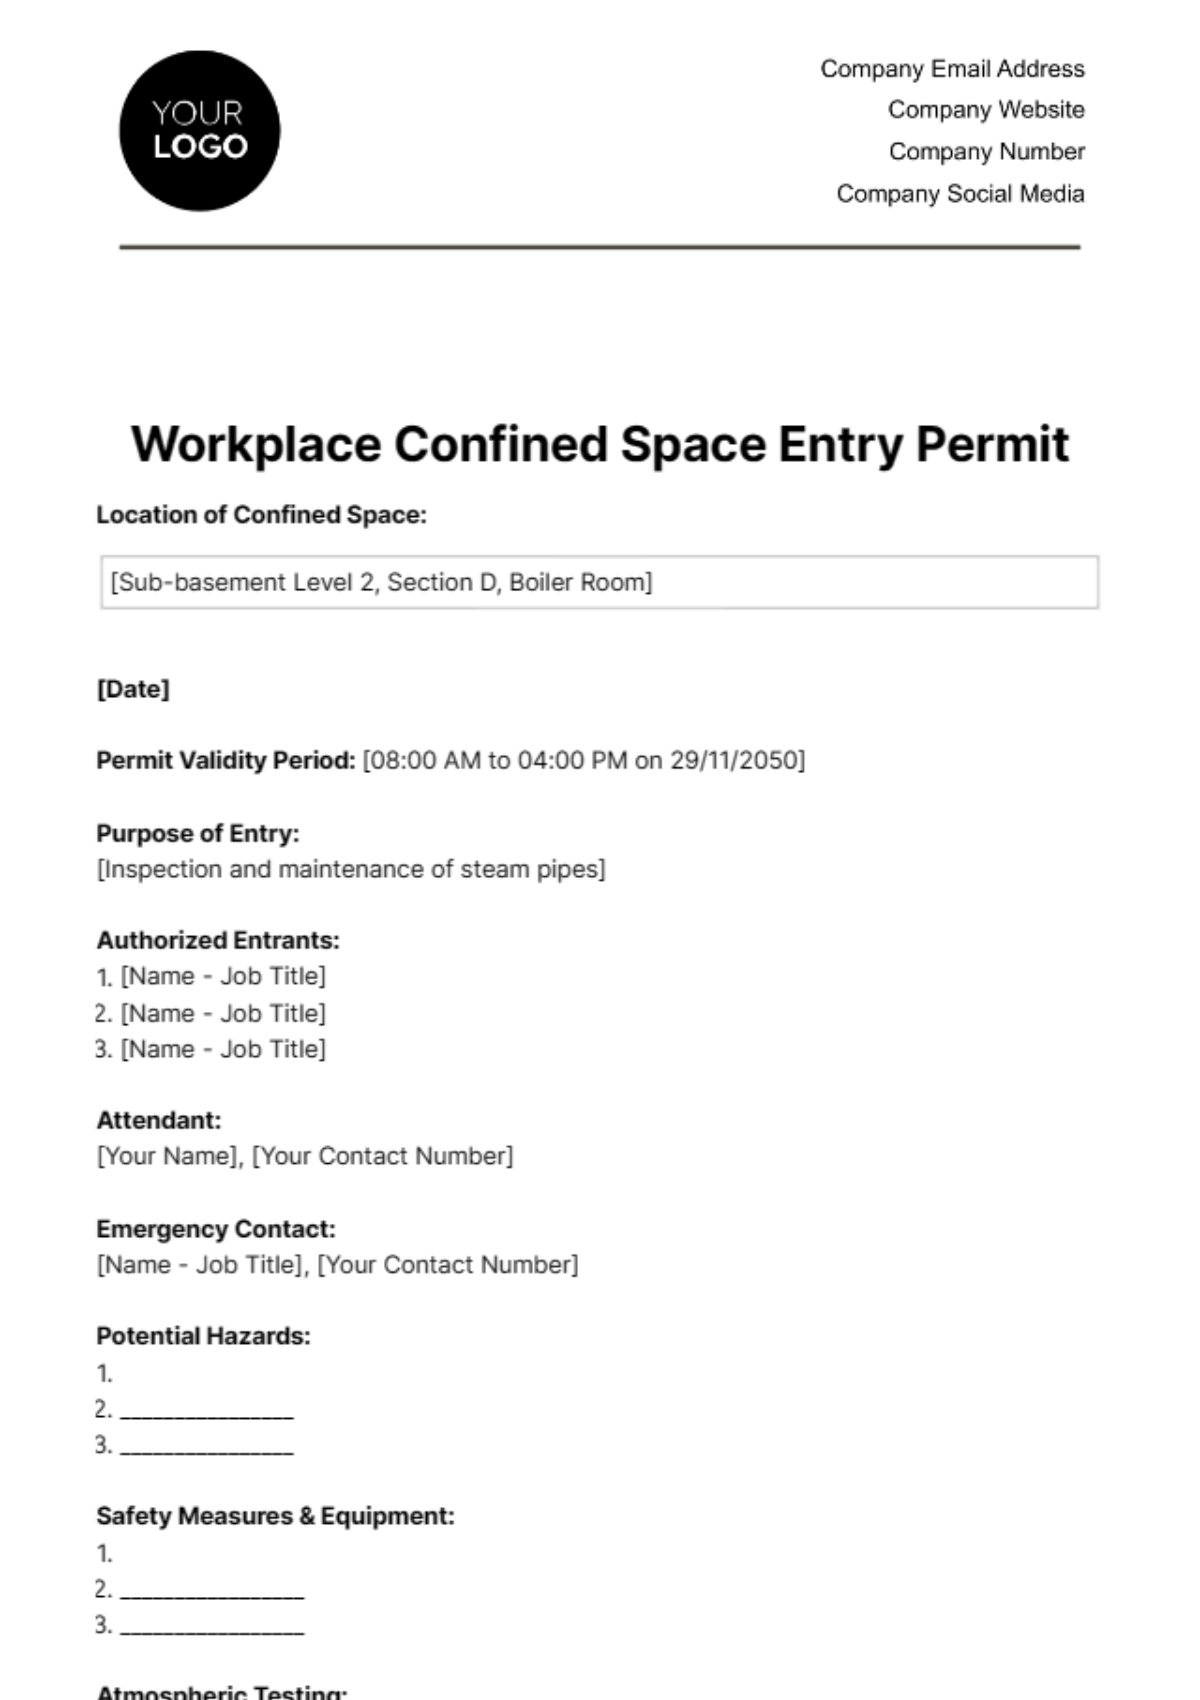 Free Workplace Confined Space Entry Permit Template